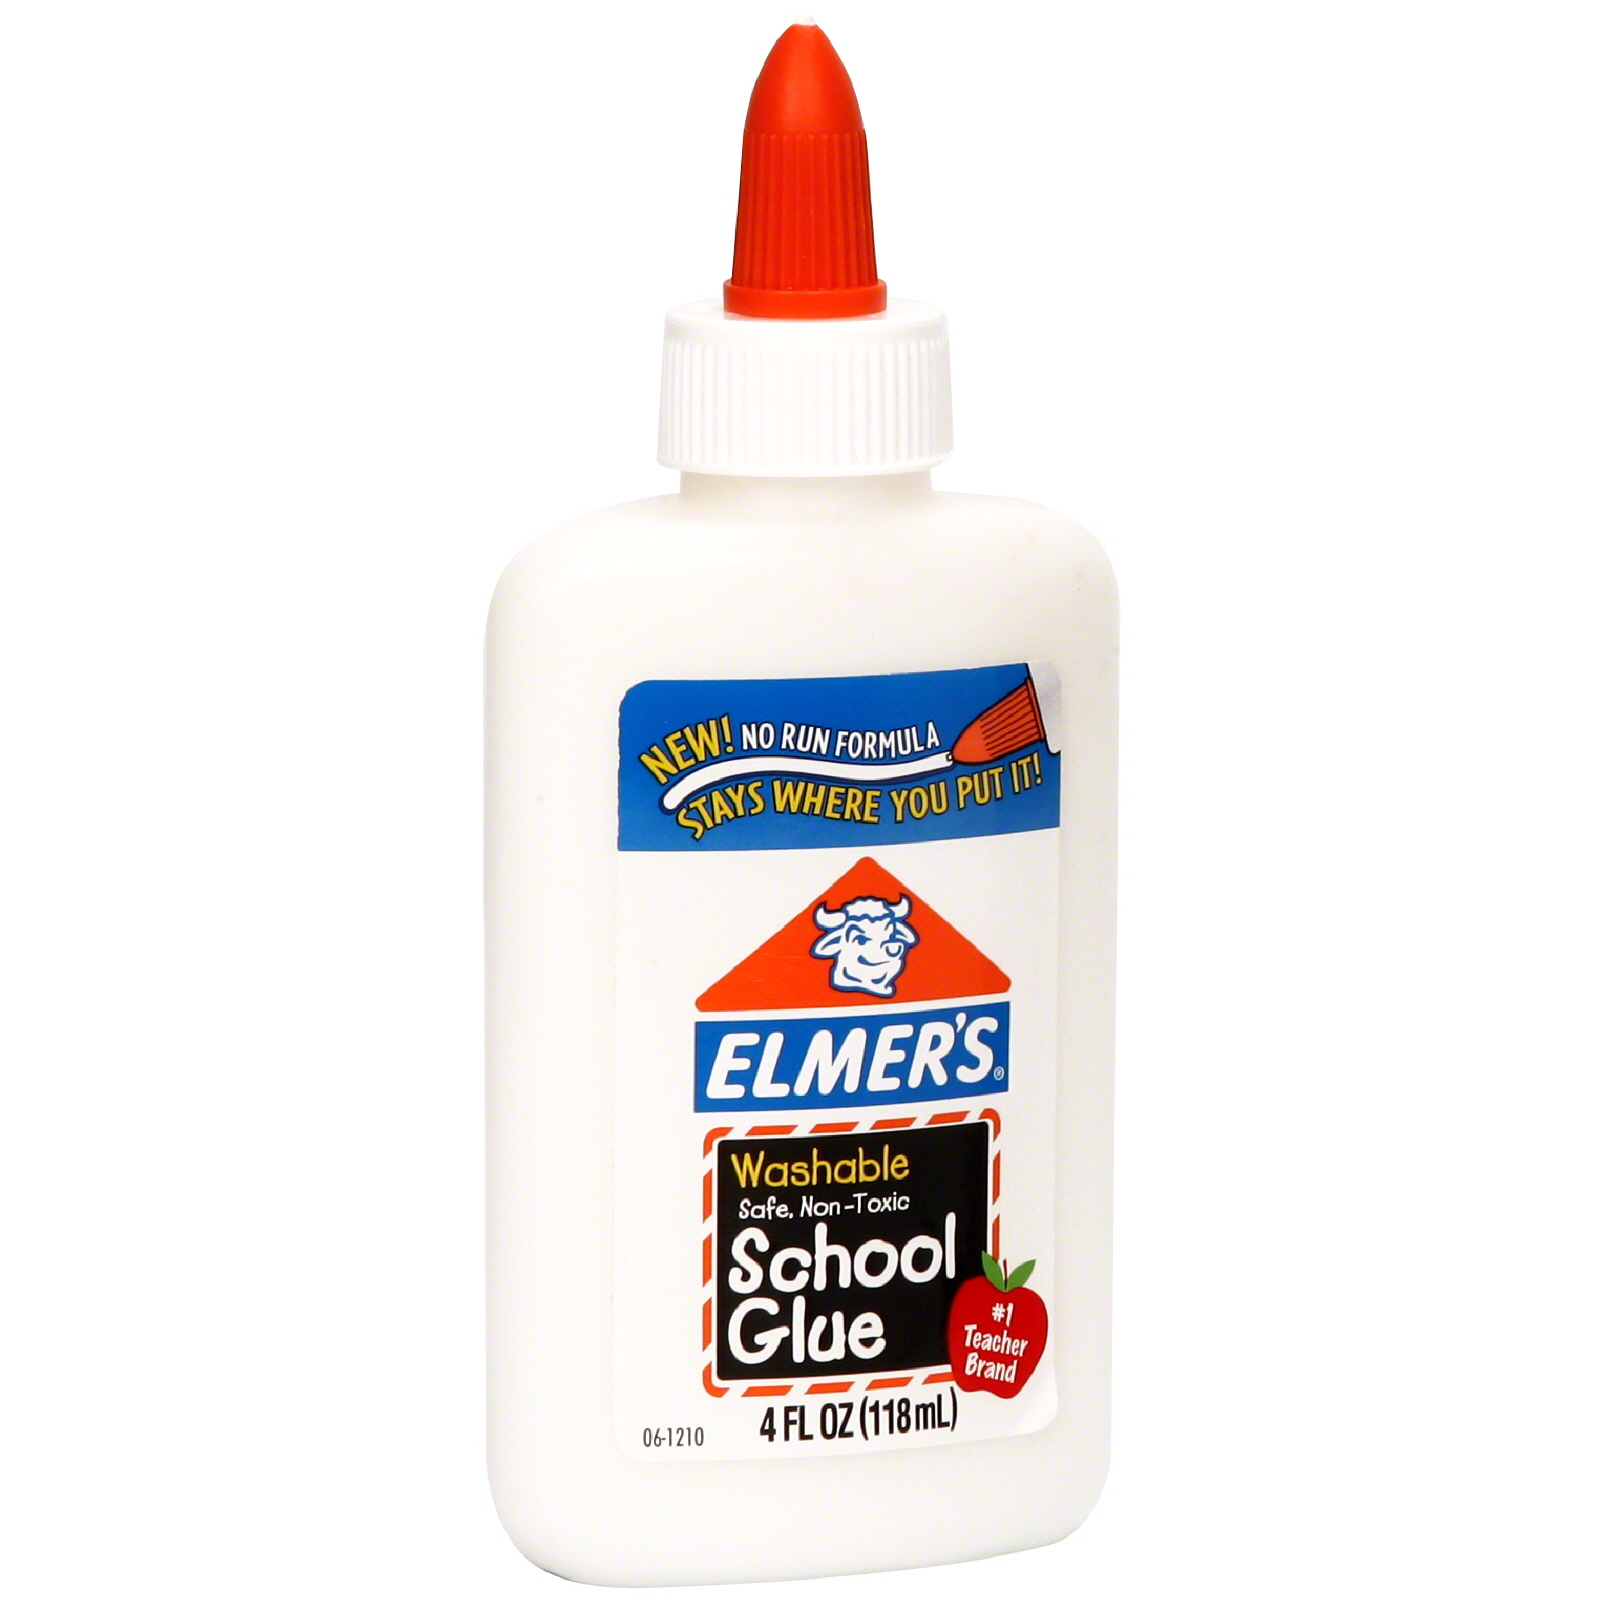  Elmers Washable No-Run School Glue, 4 oz, 1 Bottle (E304) -  Pack of 2 : Office Products